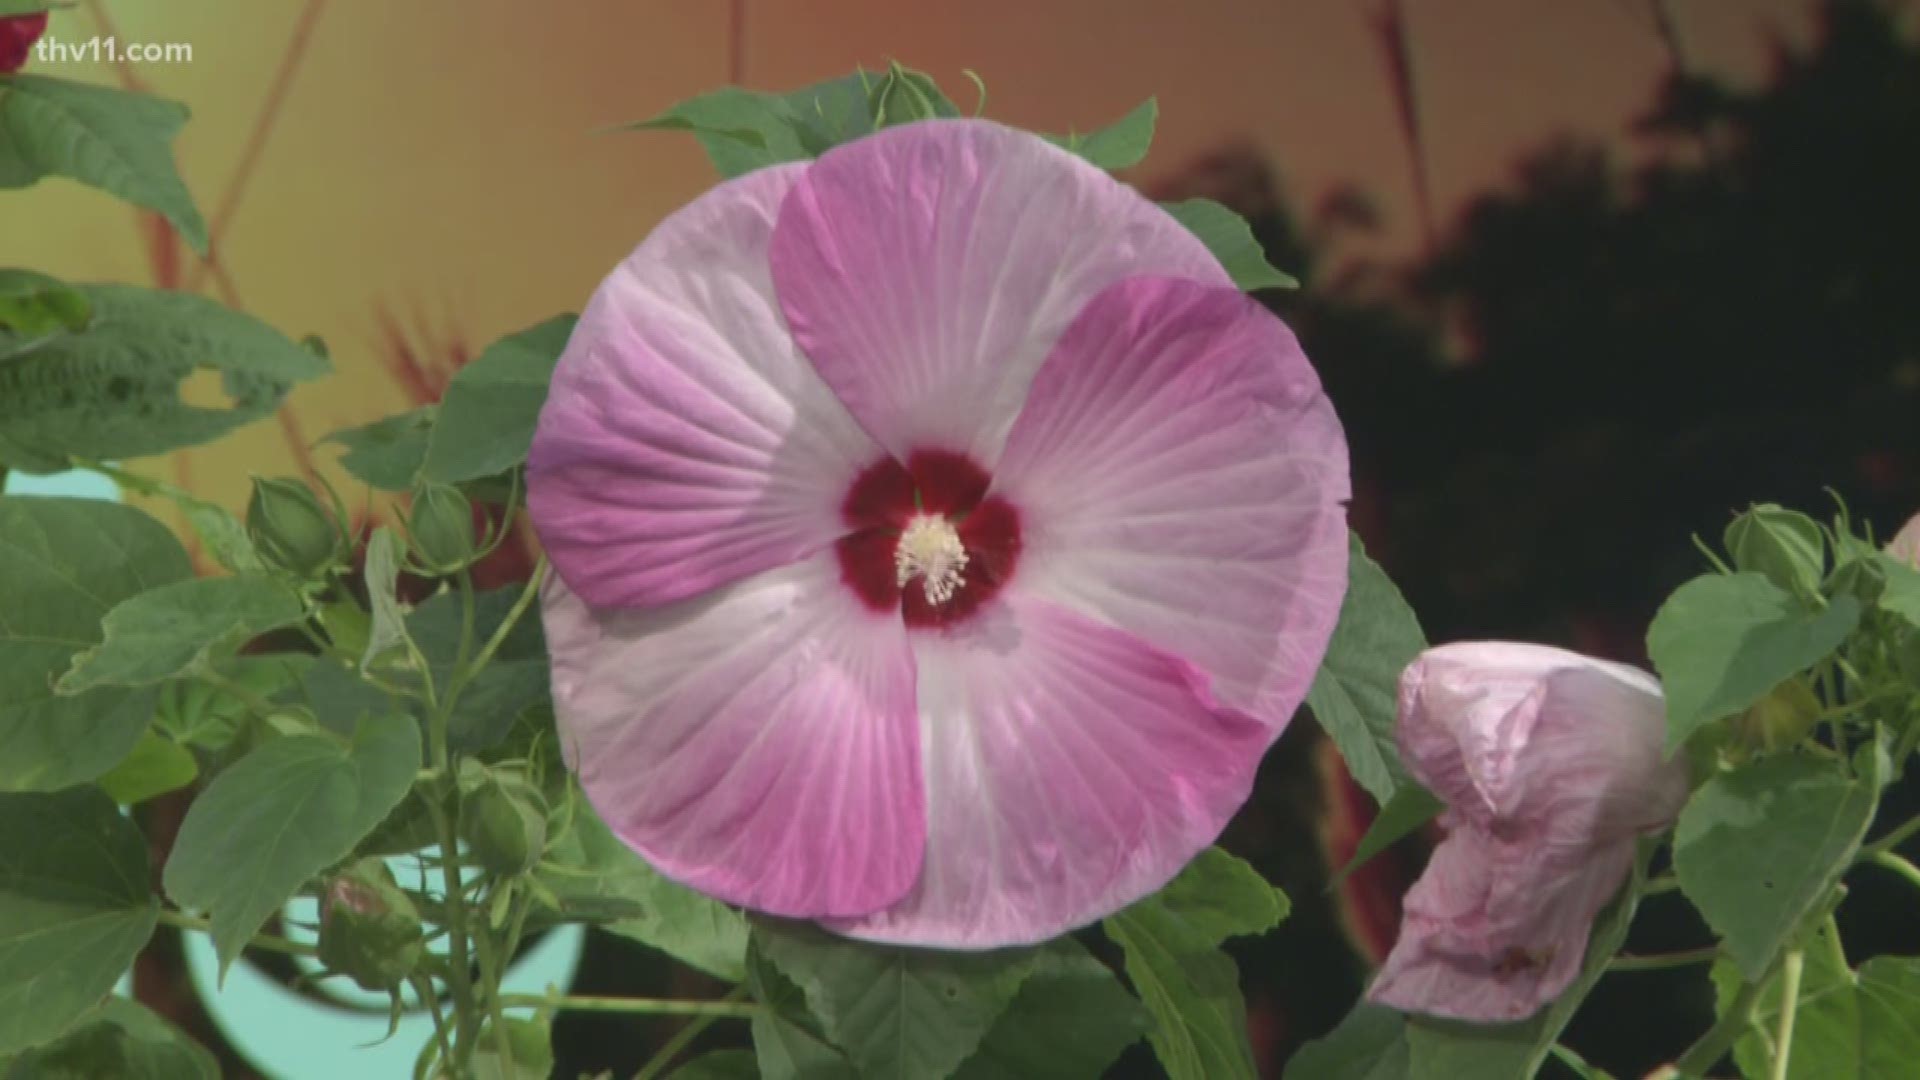 Chris H-Olsen joins us this morning to talk about Hibiscus plants.